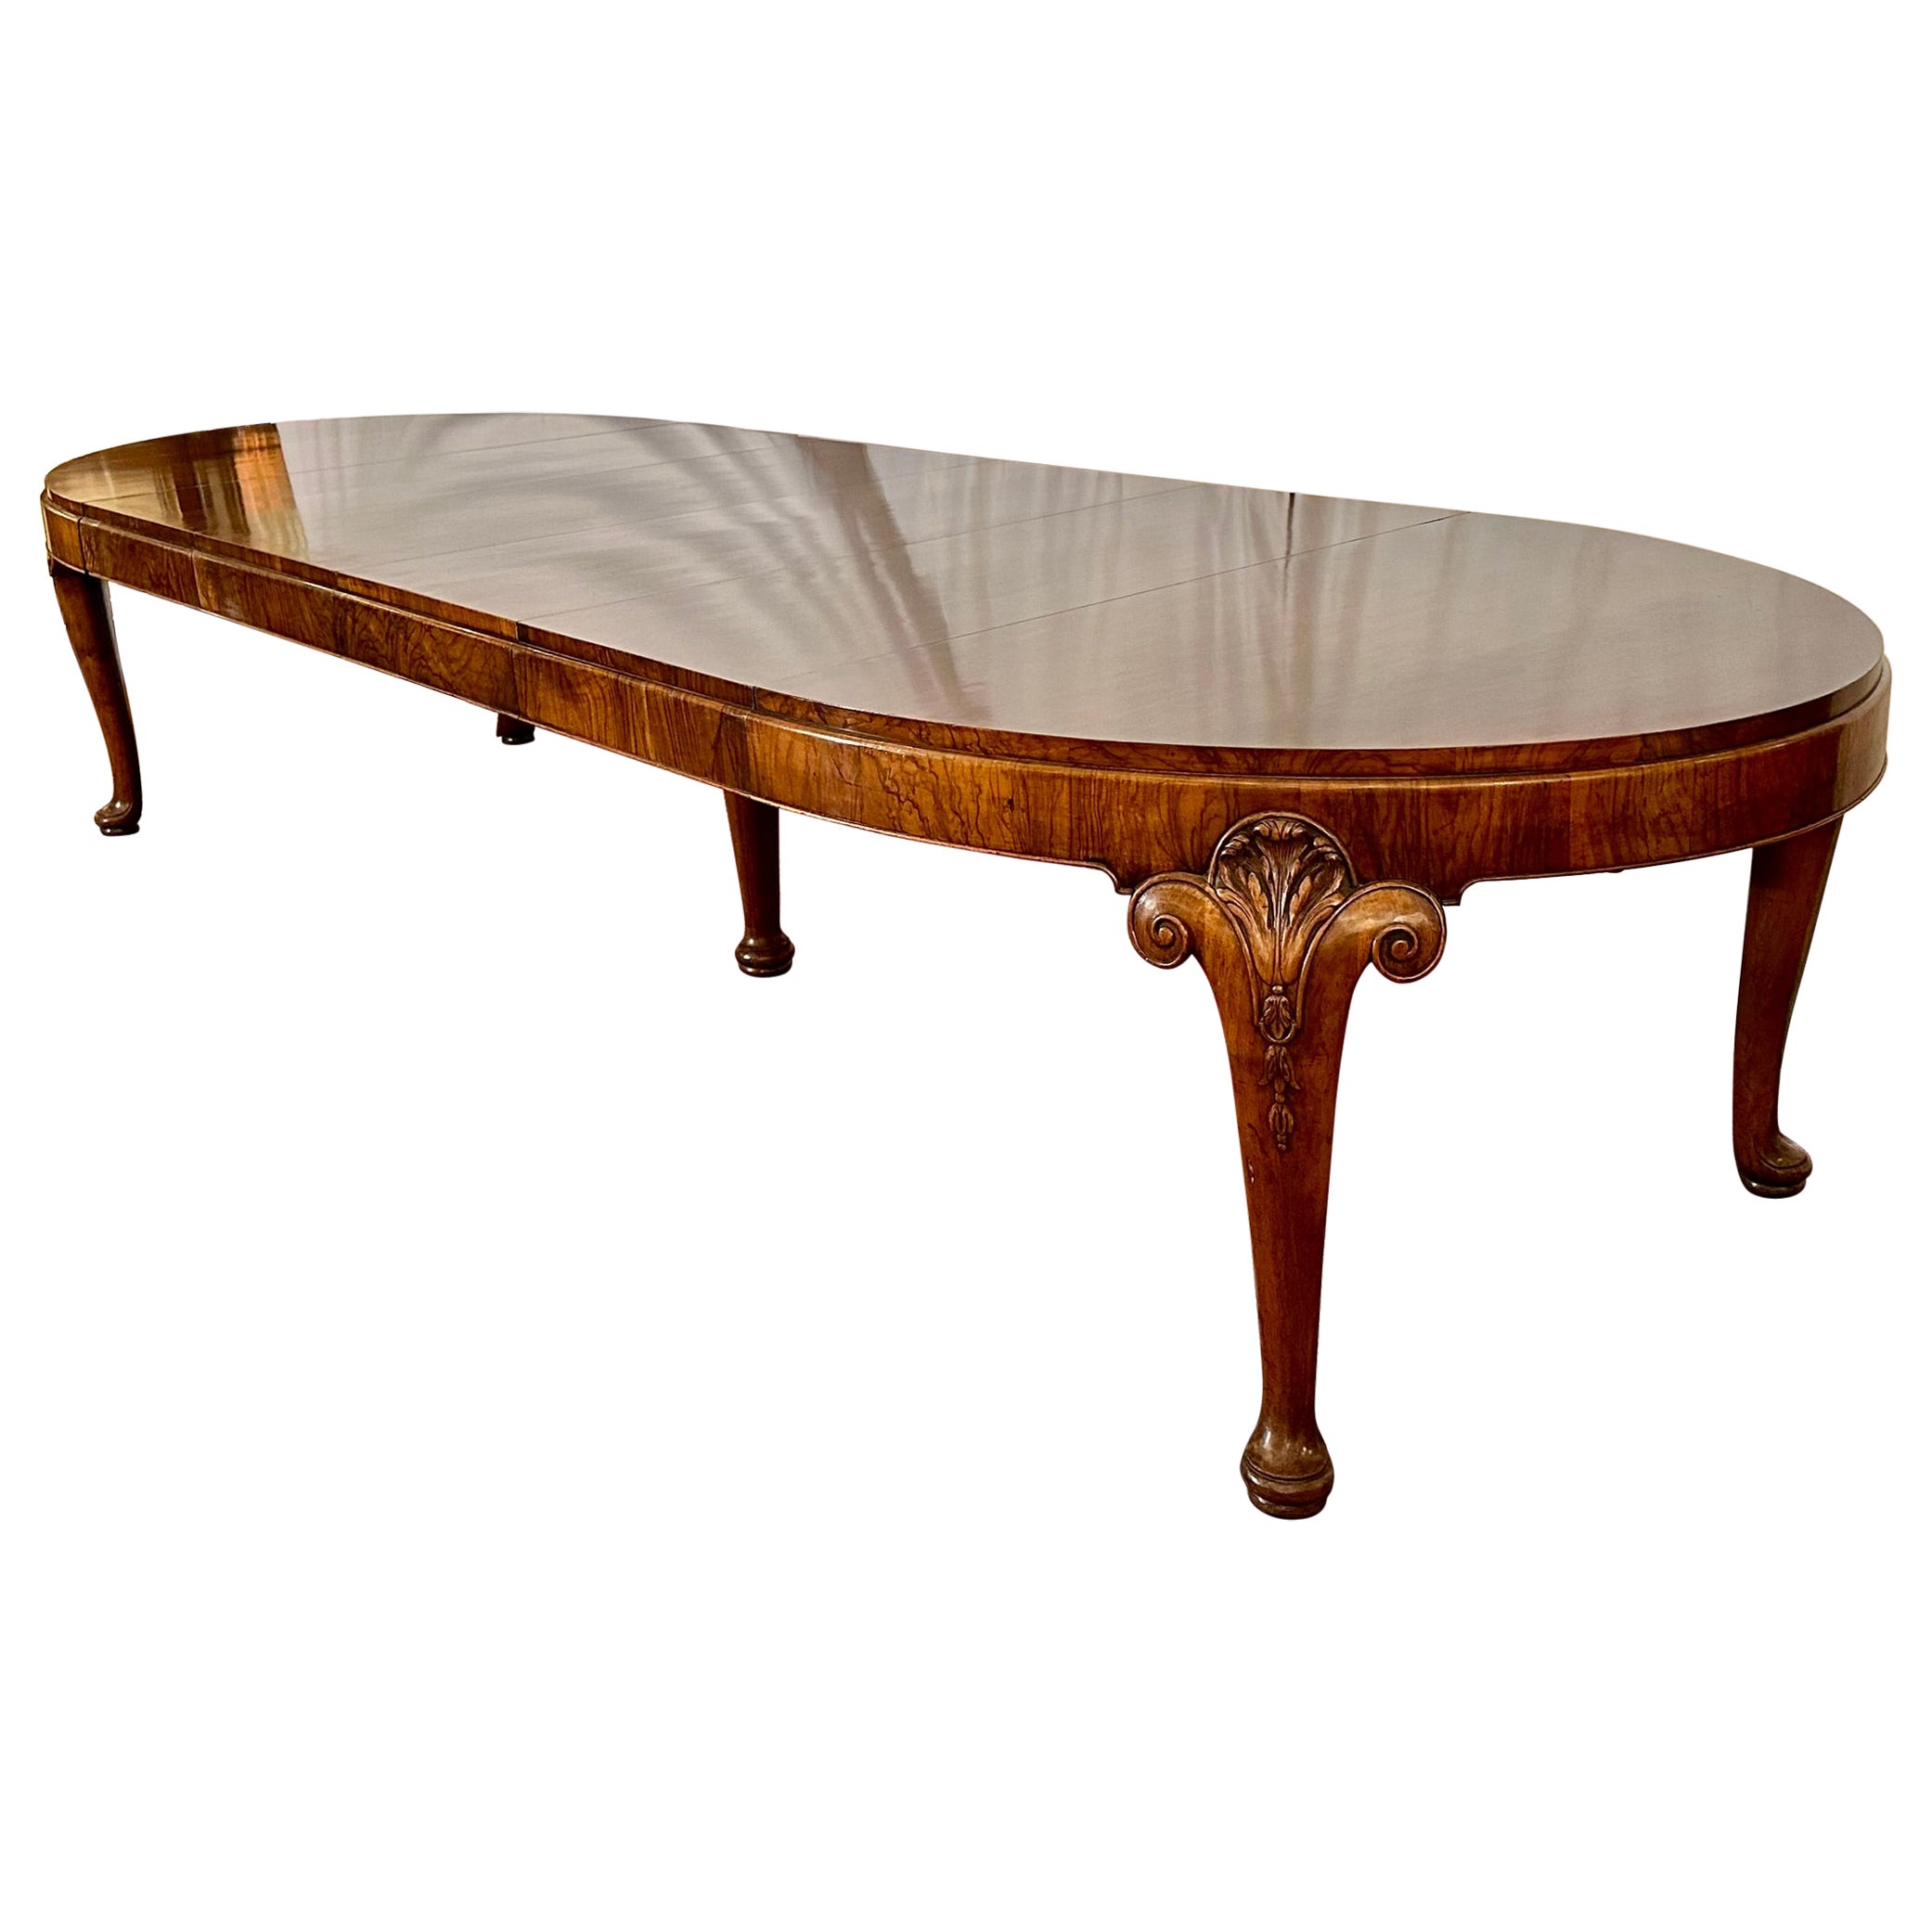 Ancienne table de salle à manger anglaise "Waring and Gillows" en noyer ronce, Circa 1890.